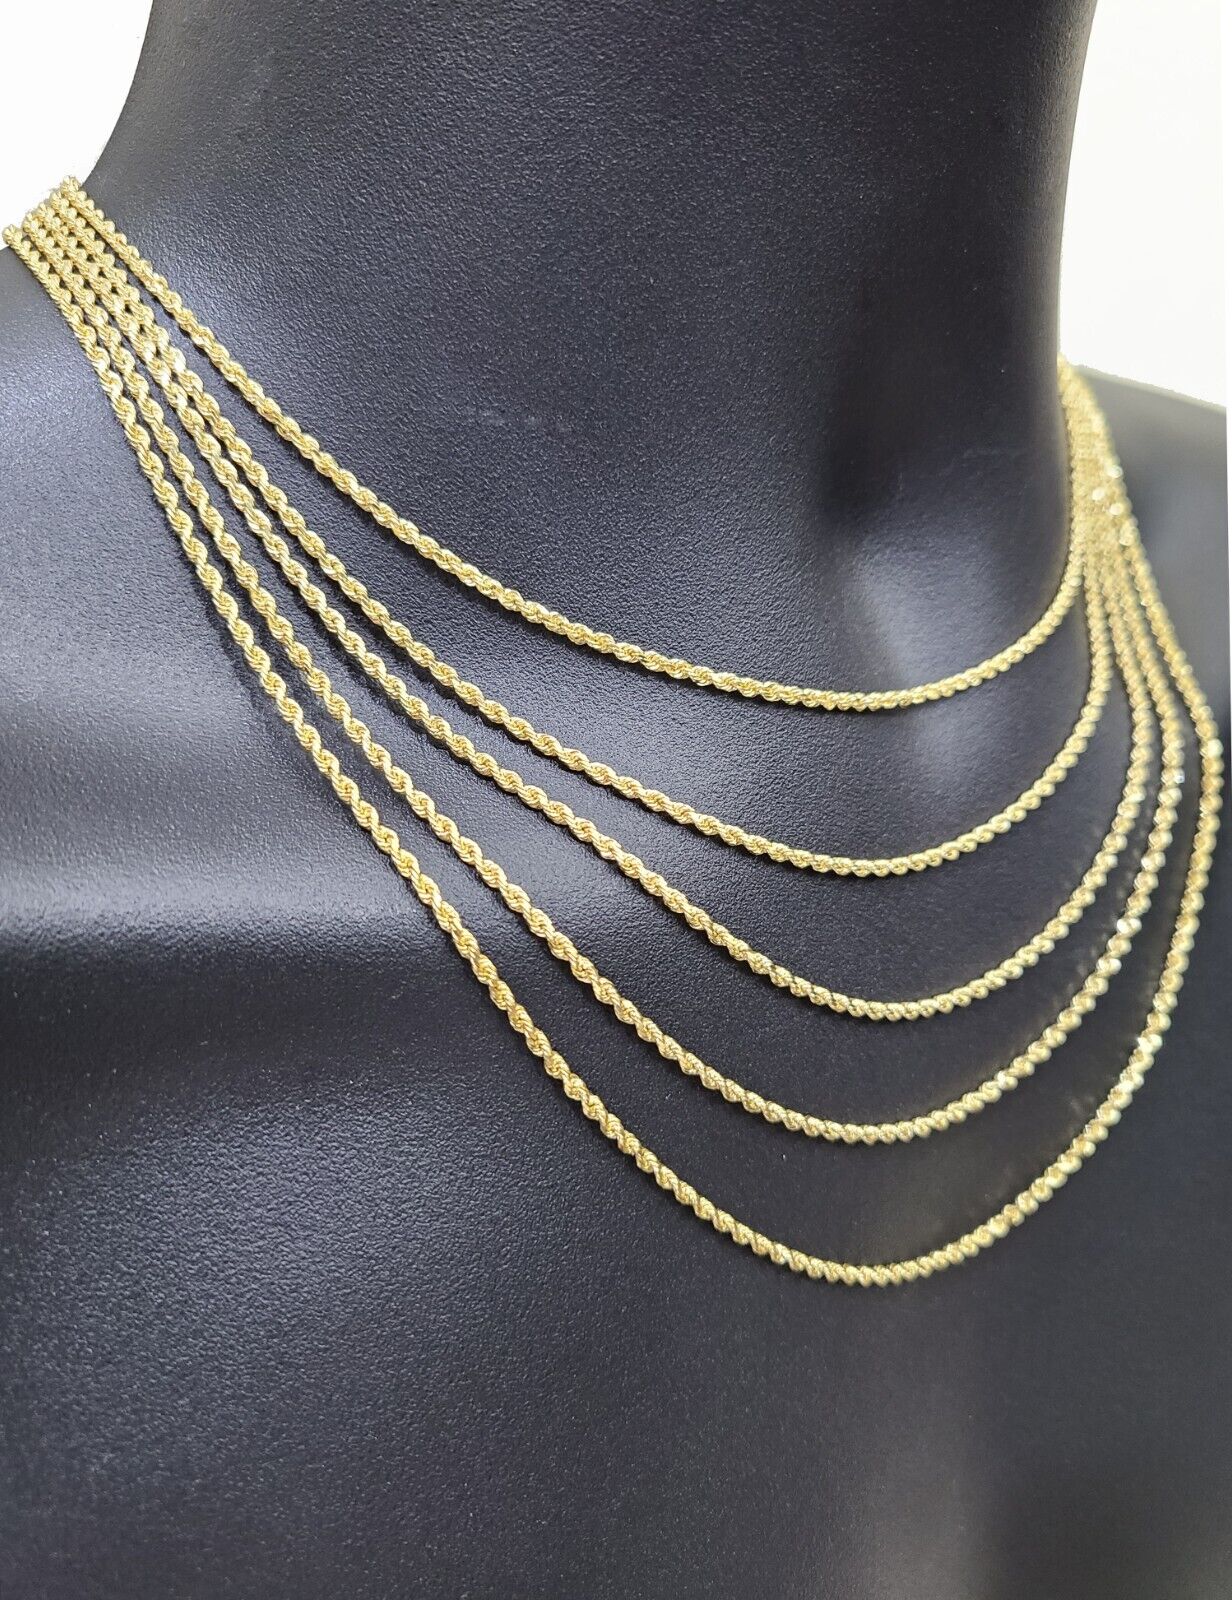 18k Real Gold Plated Rope Chain 2.5mm 5mm Stainless Steel Men Chain Necklace  Women Chains 16 Inches 36 Inches, No Gemstone : Amazon.in: Fashion